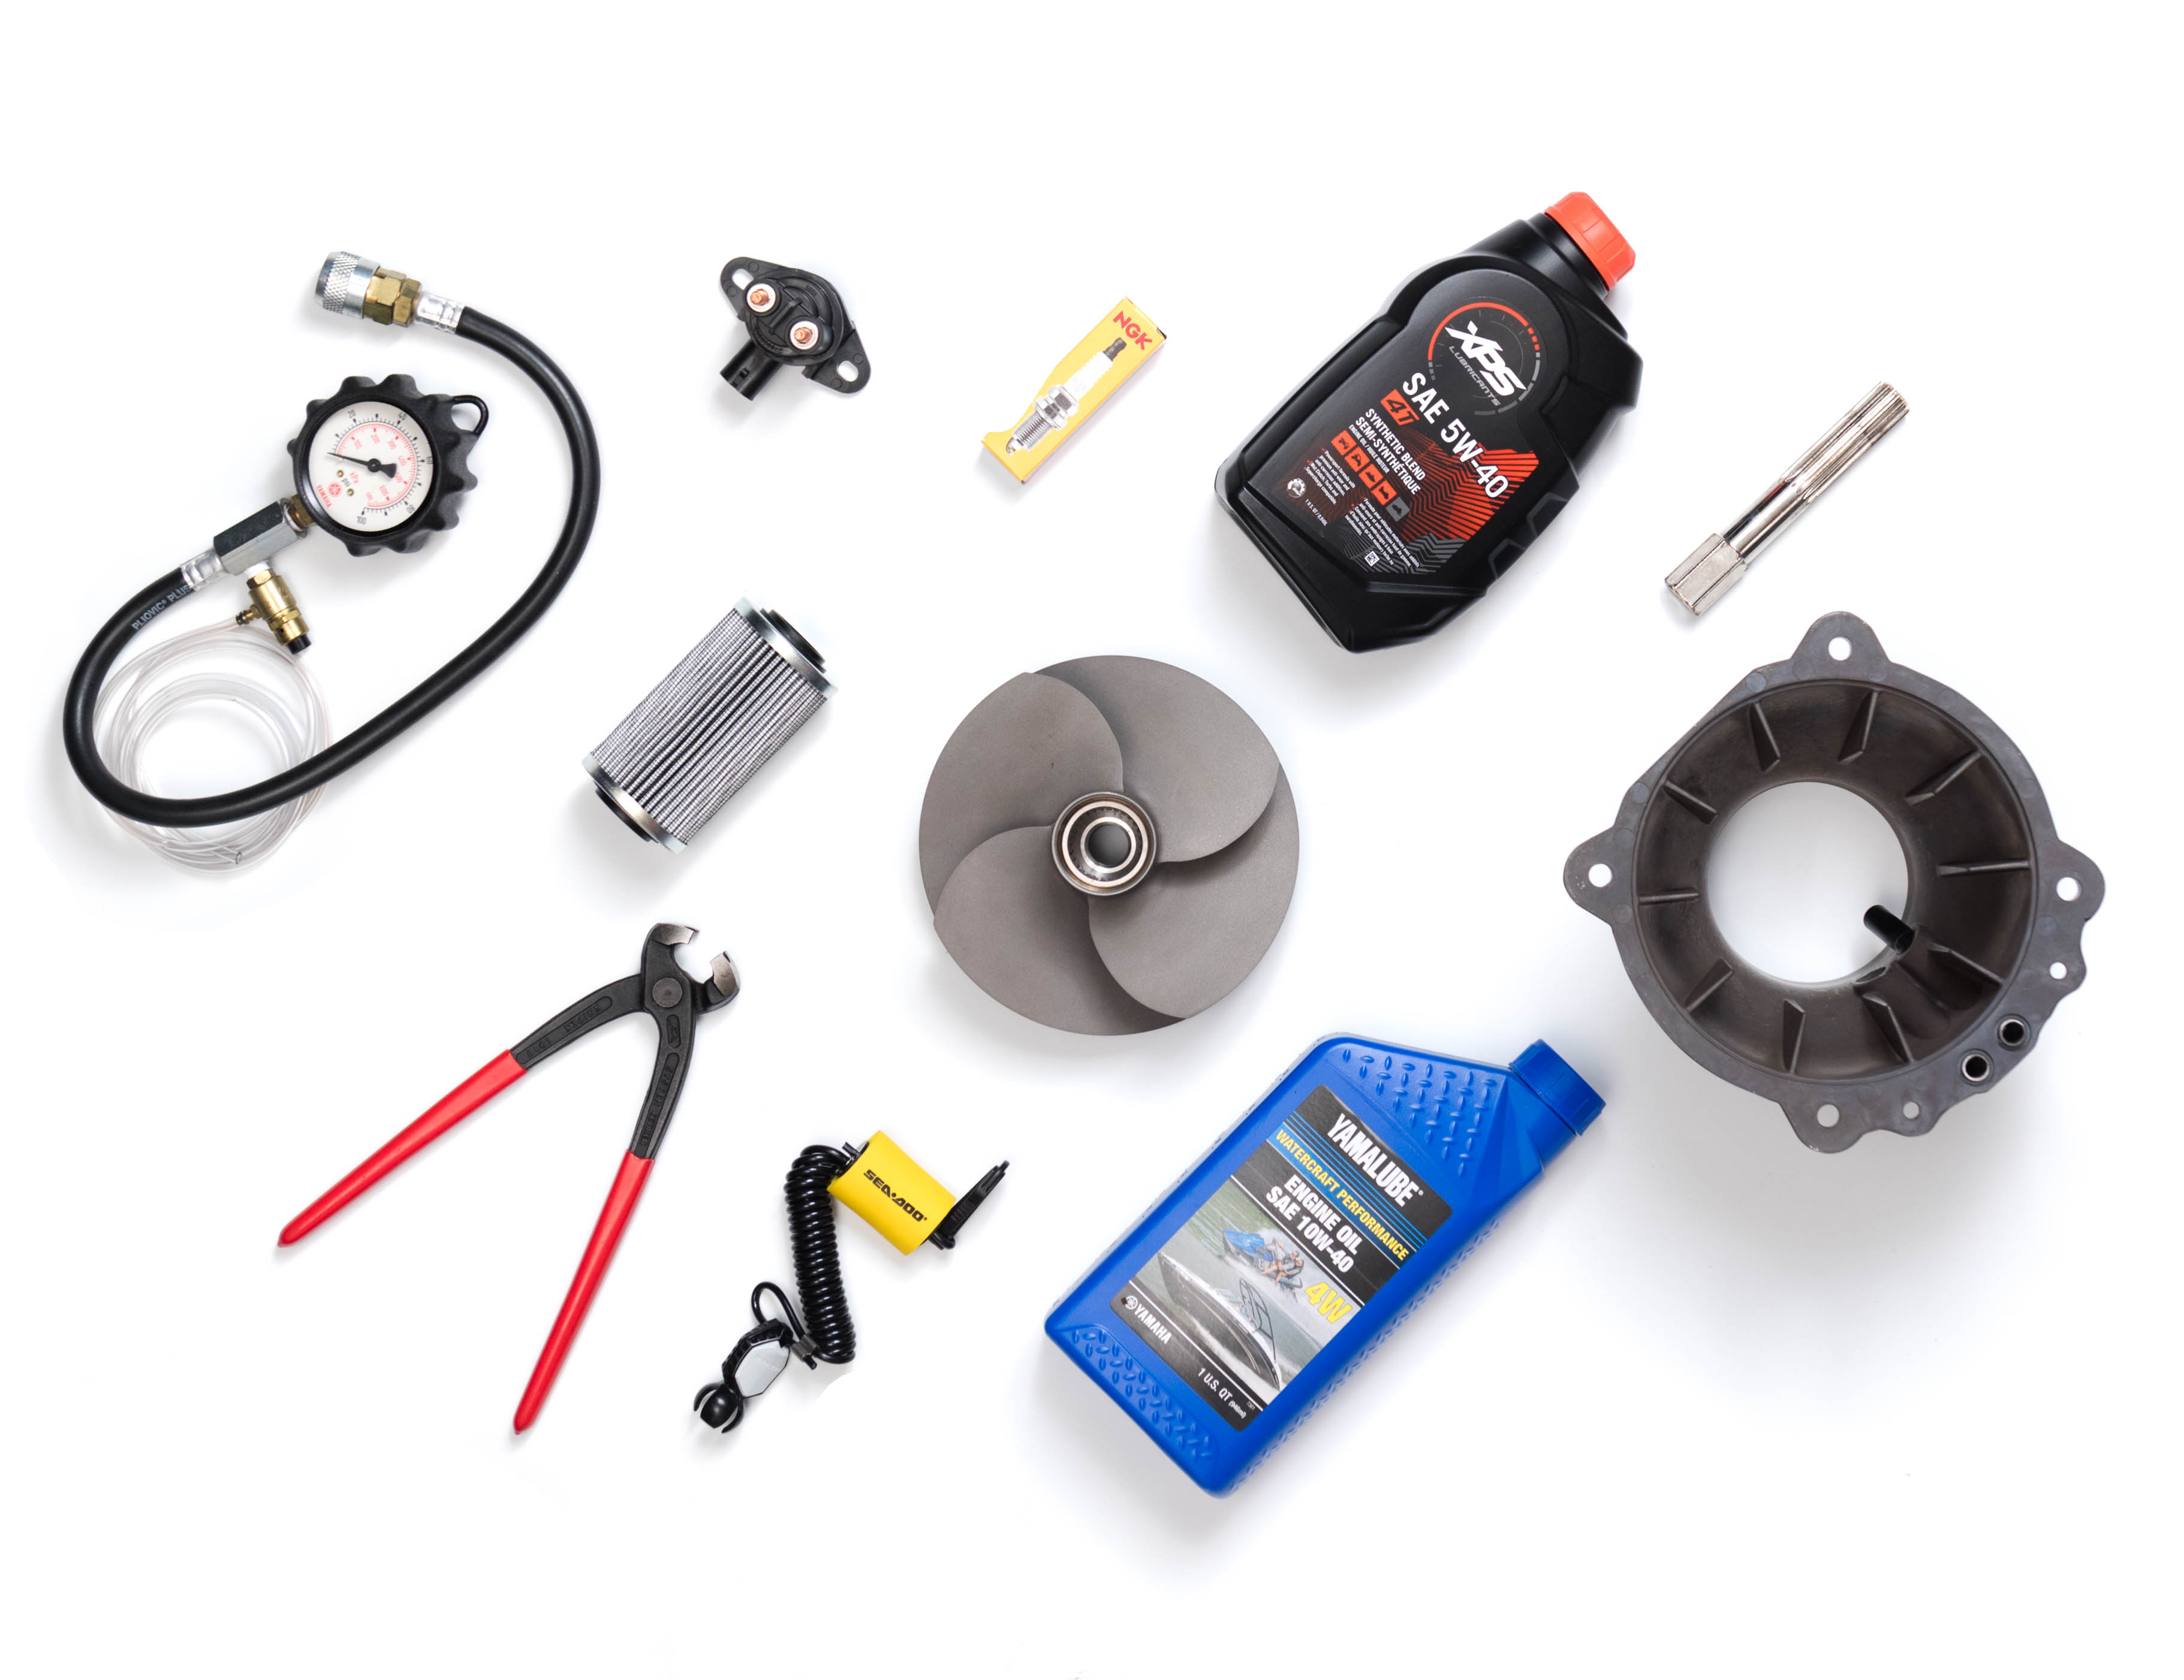 stock photo of assortment of parts and oil available for jet skis